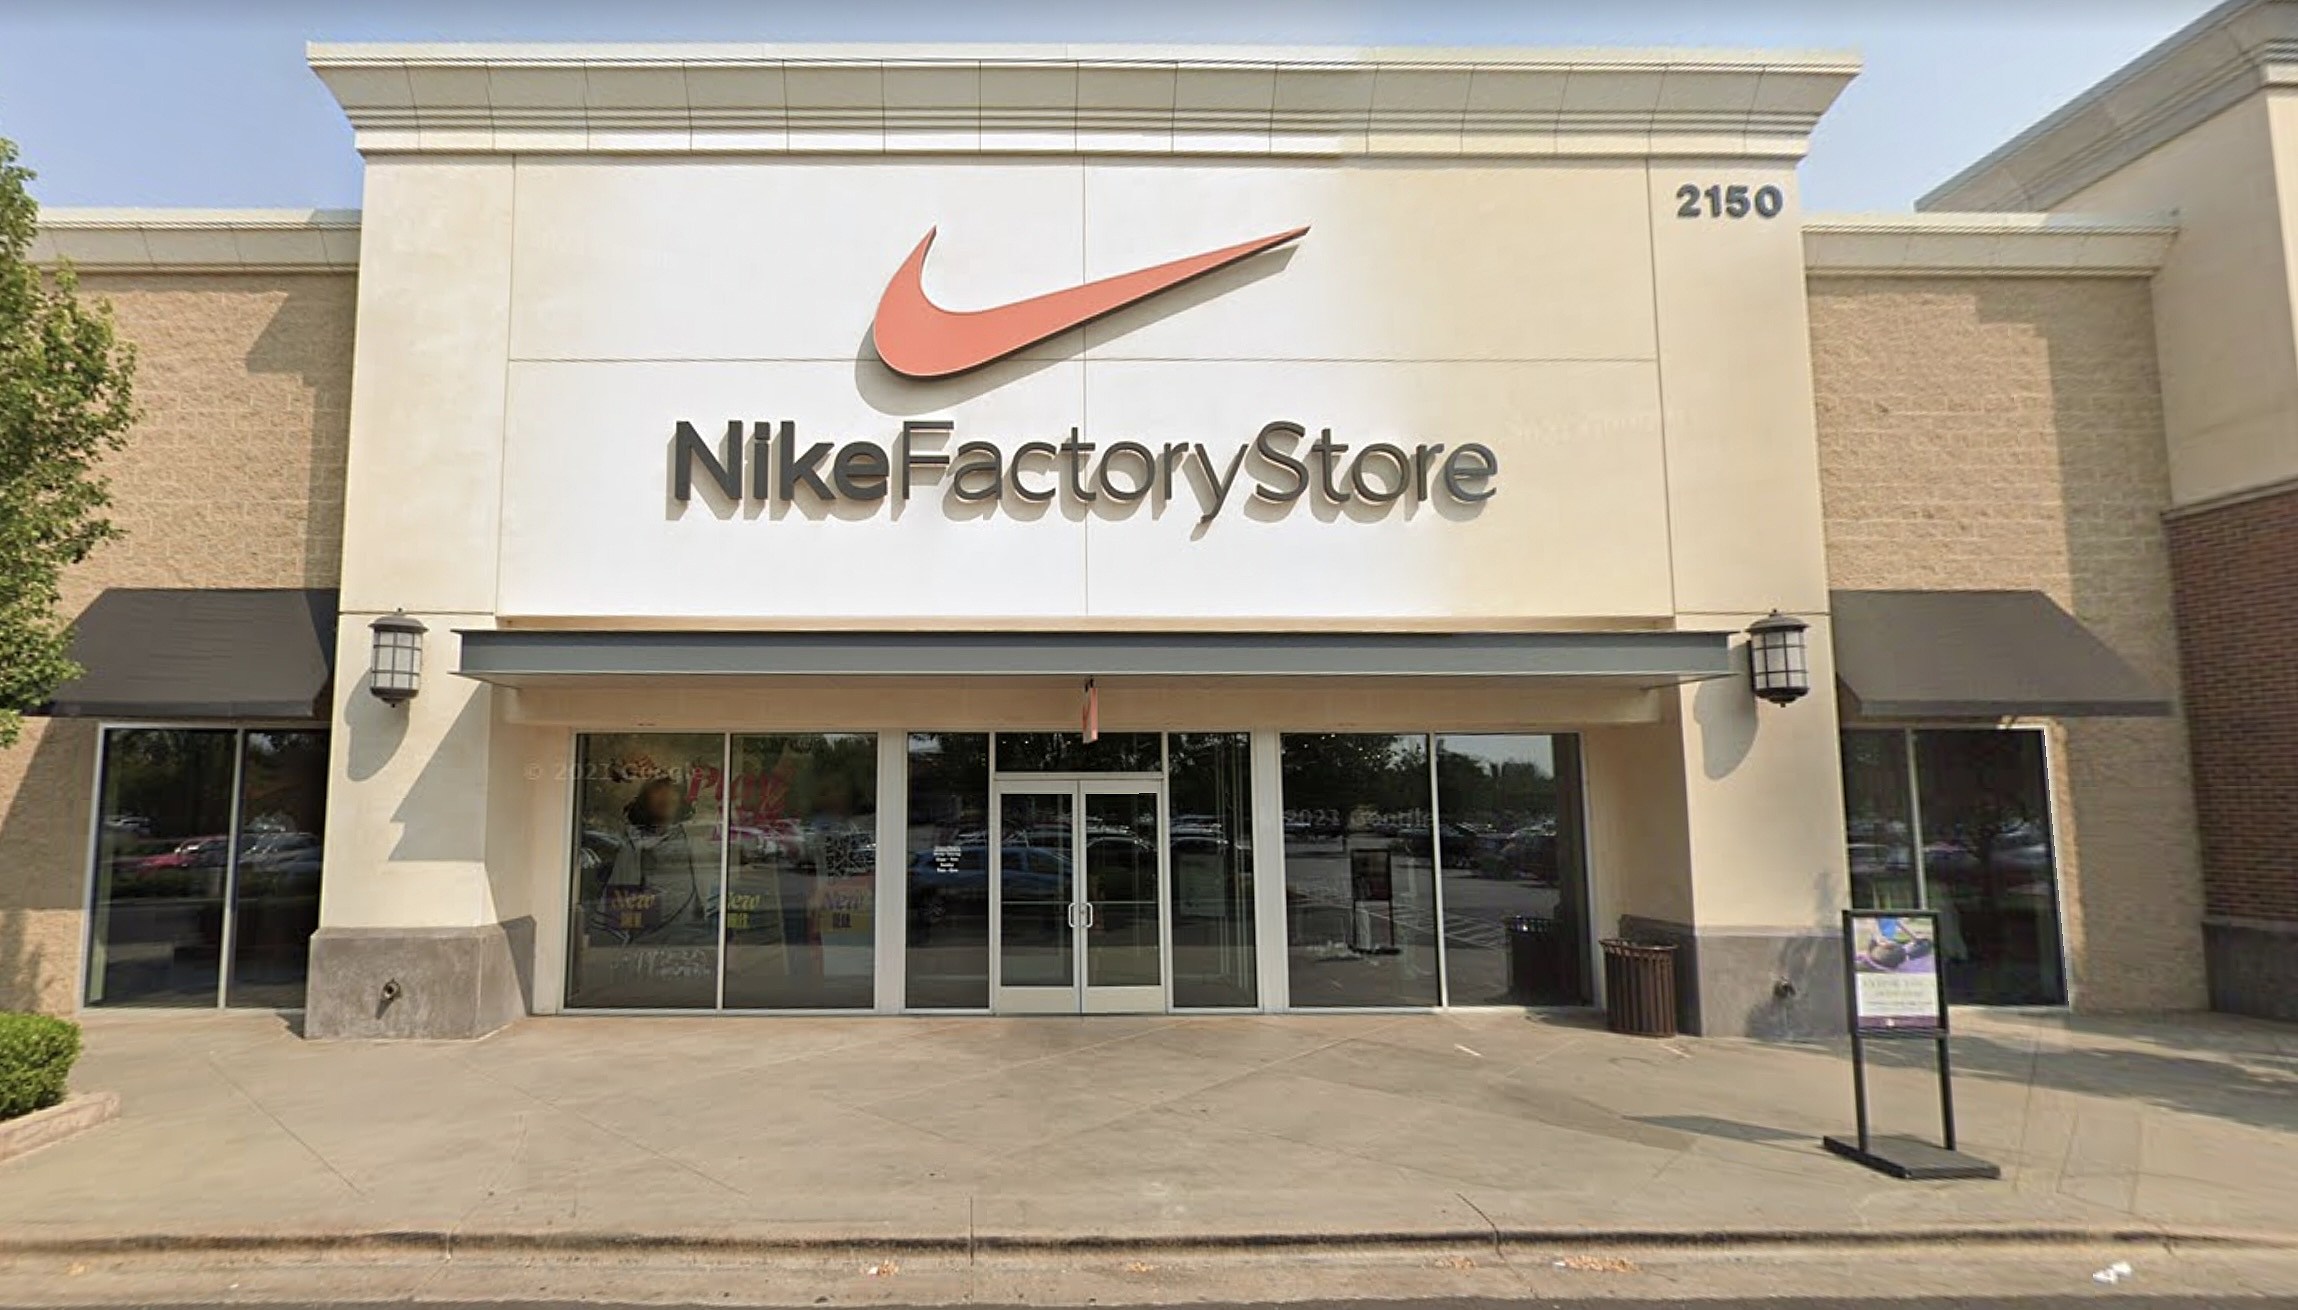 What Happened to the Nike Factory Store in Meridian?